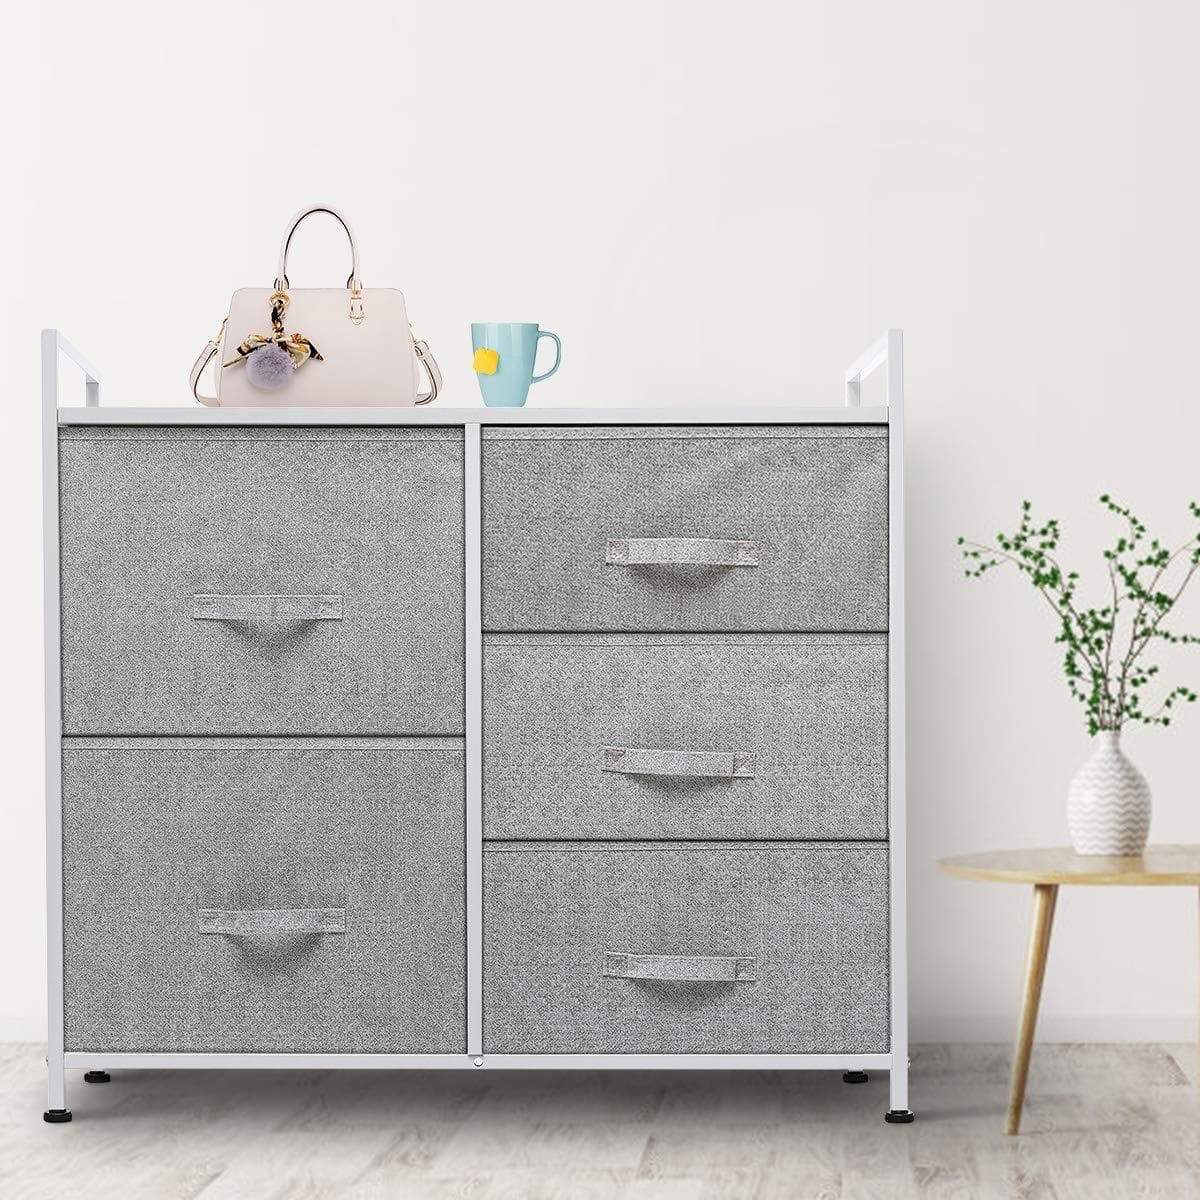 Top rated kingso fabric 5 drawer dresser storage tower organizer unit with sturdy steel frame and easy pull faux linen drawers for bedroom living room guest room dorm closet grey